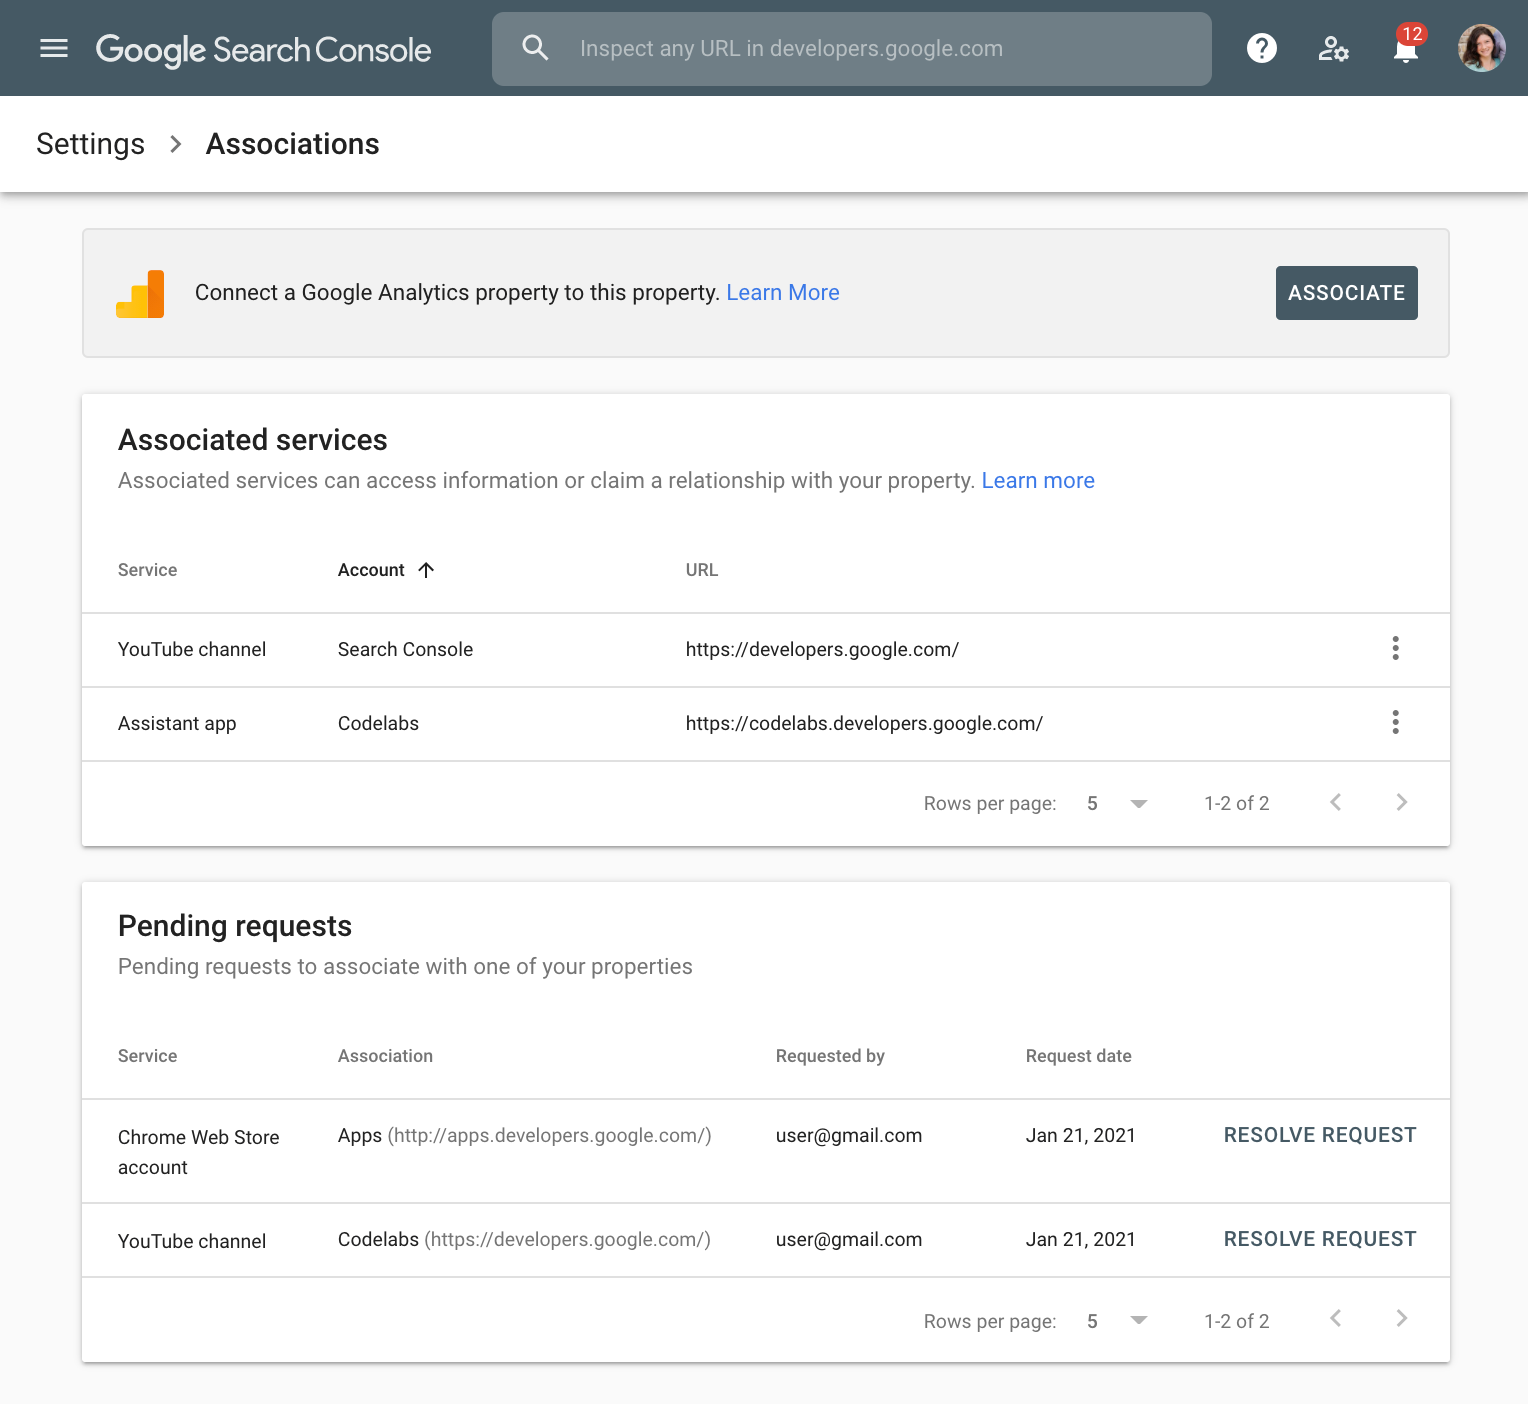 Google Search Console Associations page